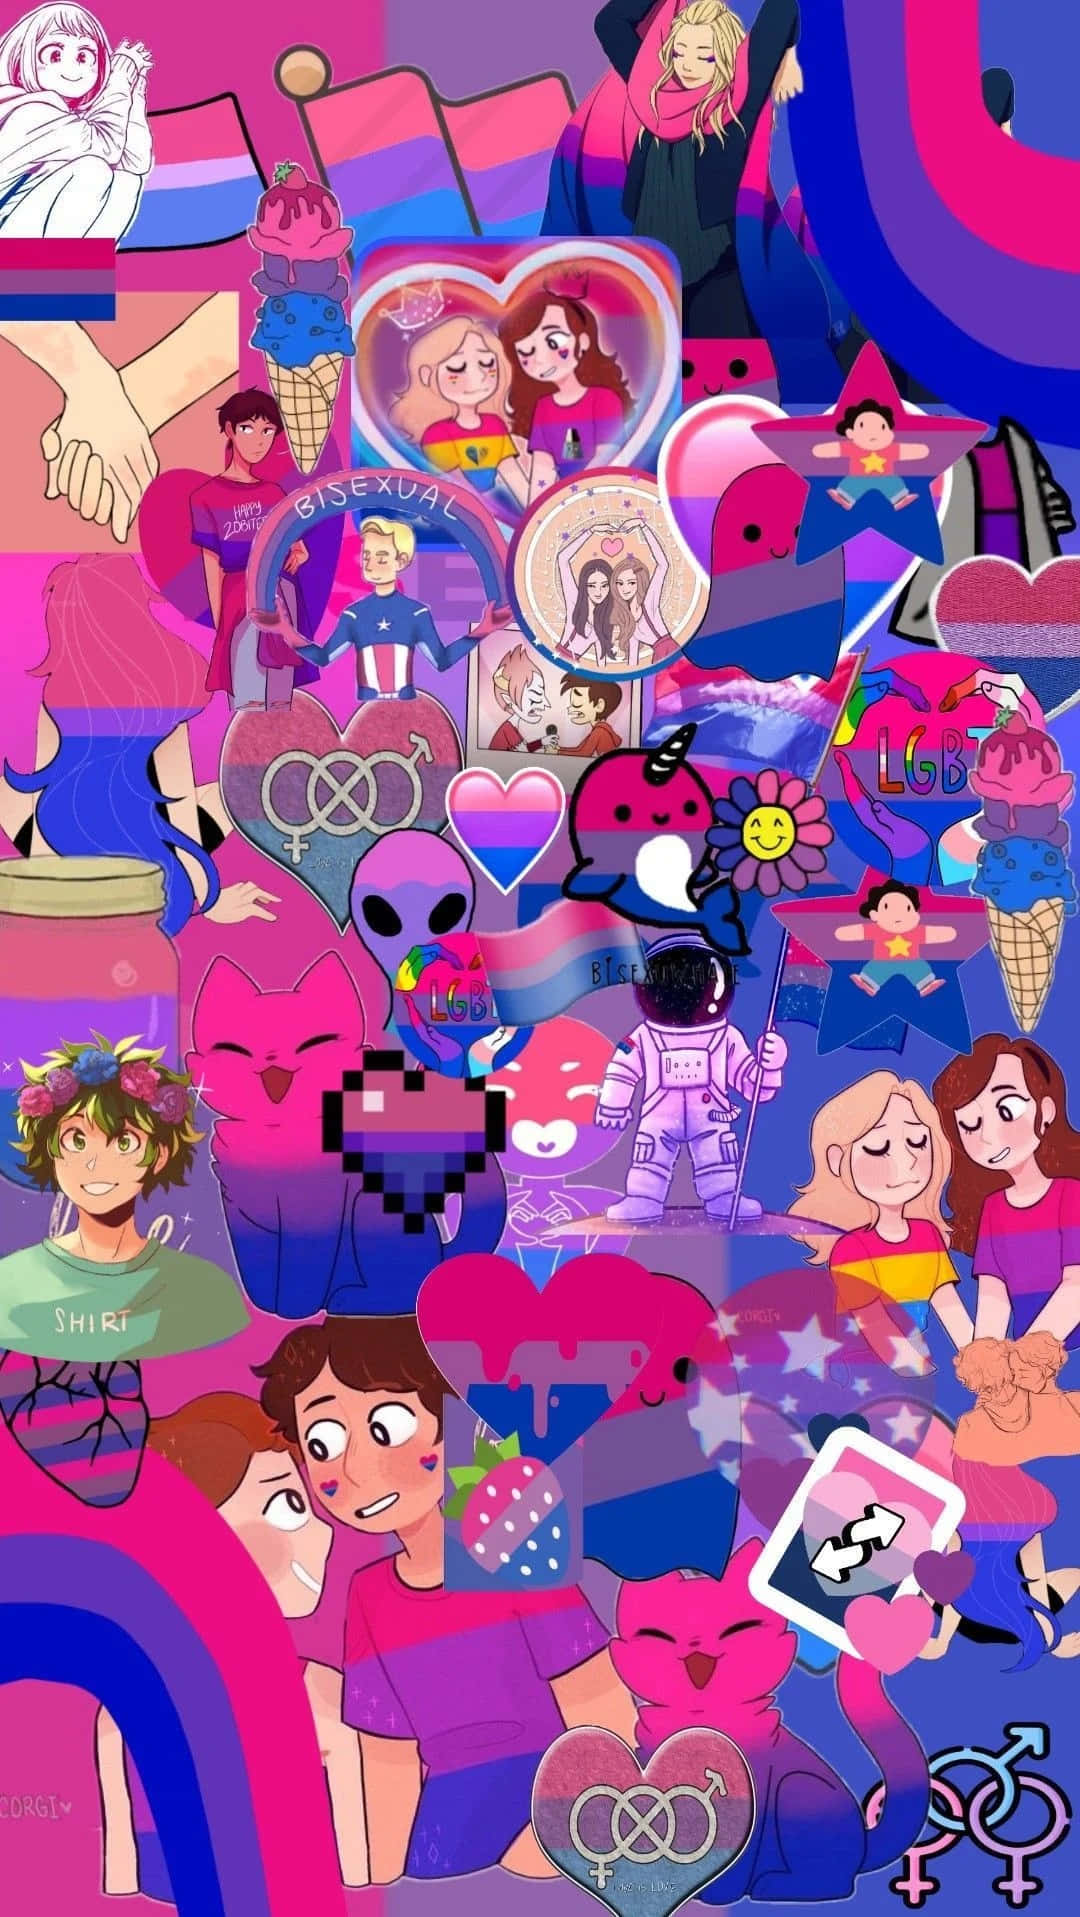 A Collage Of People In Pink And Blue Wallpaper